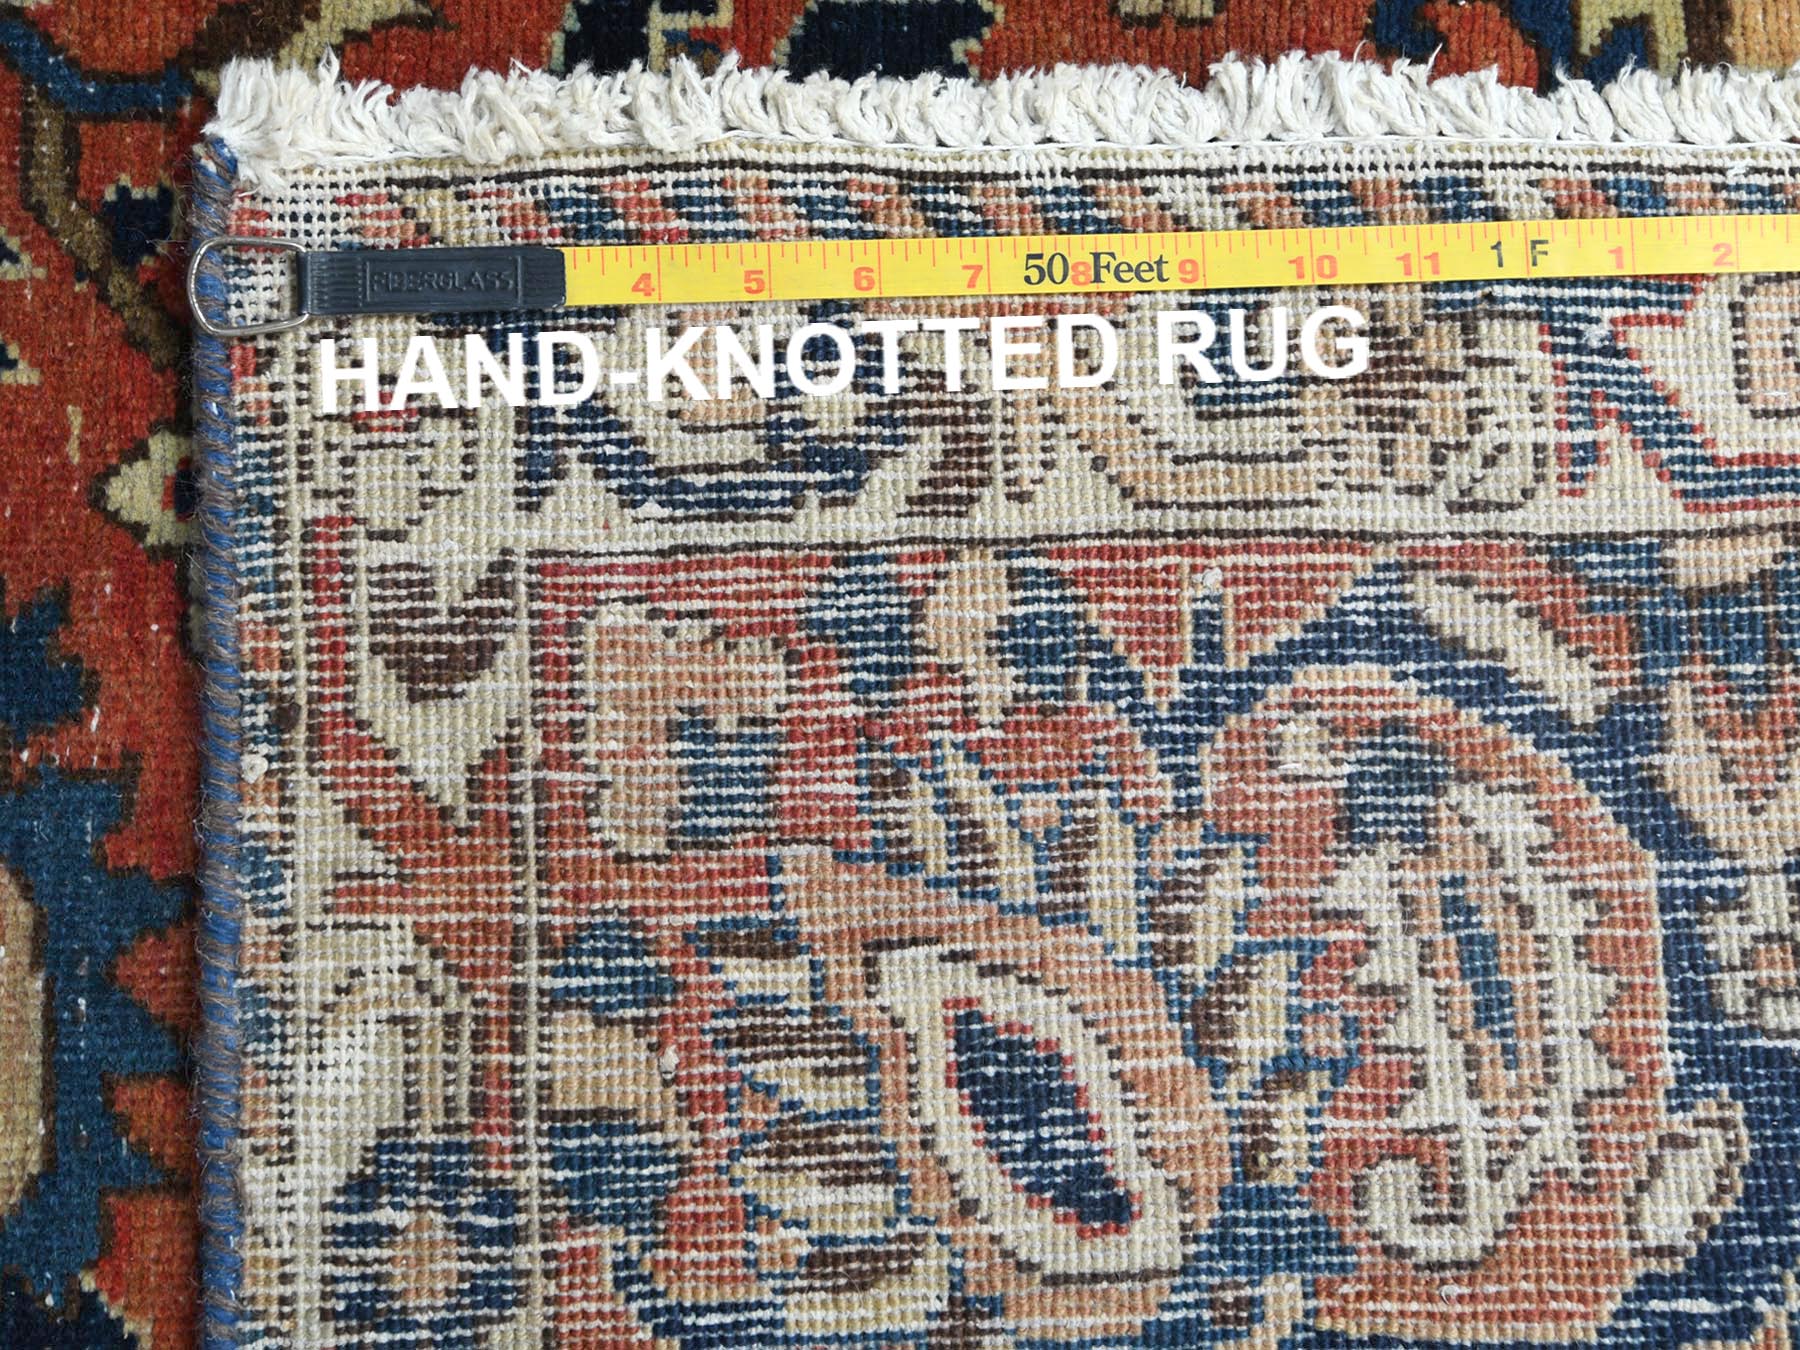 Overdyed & Vintage Rugs LUV730593